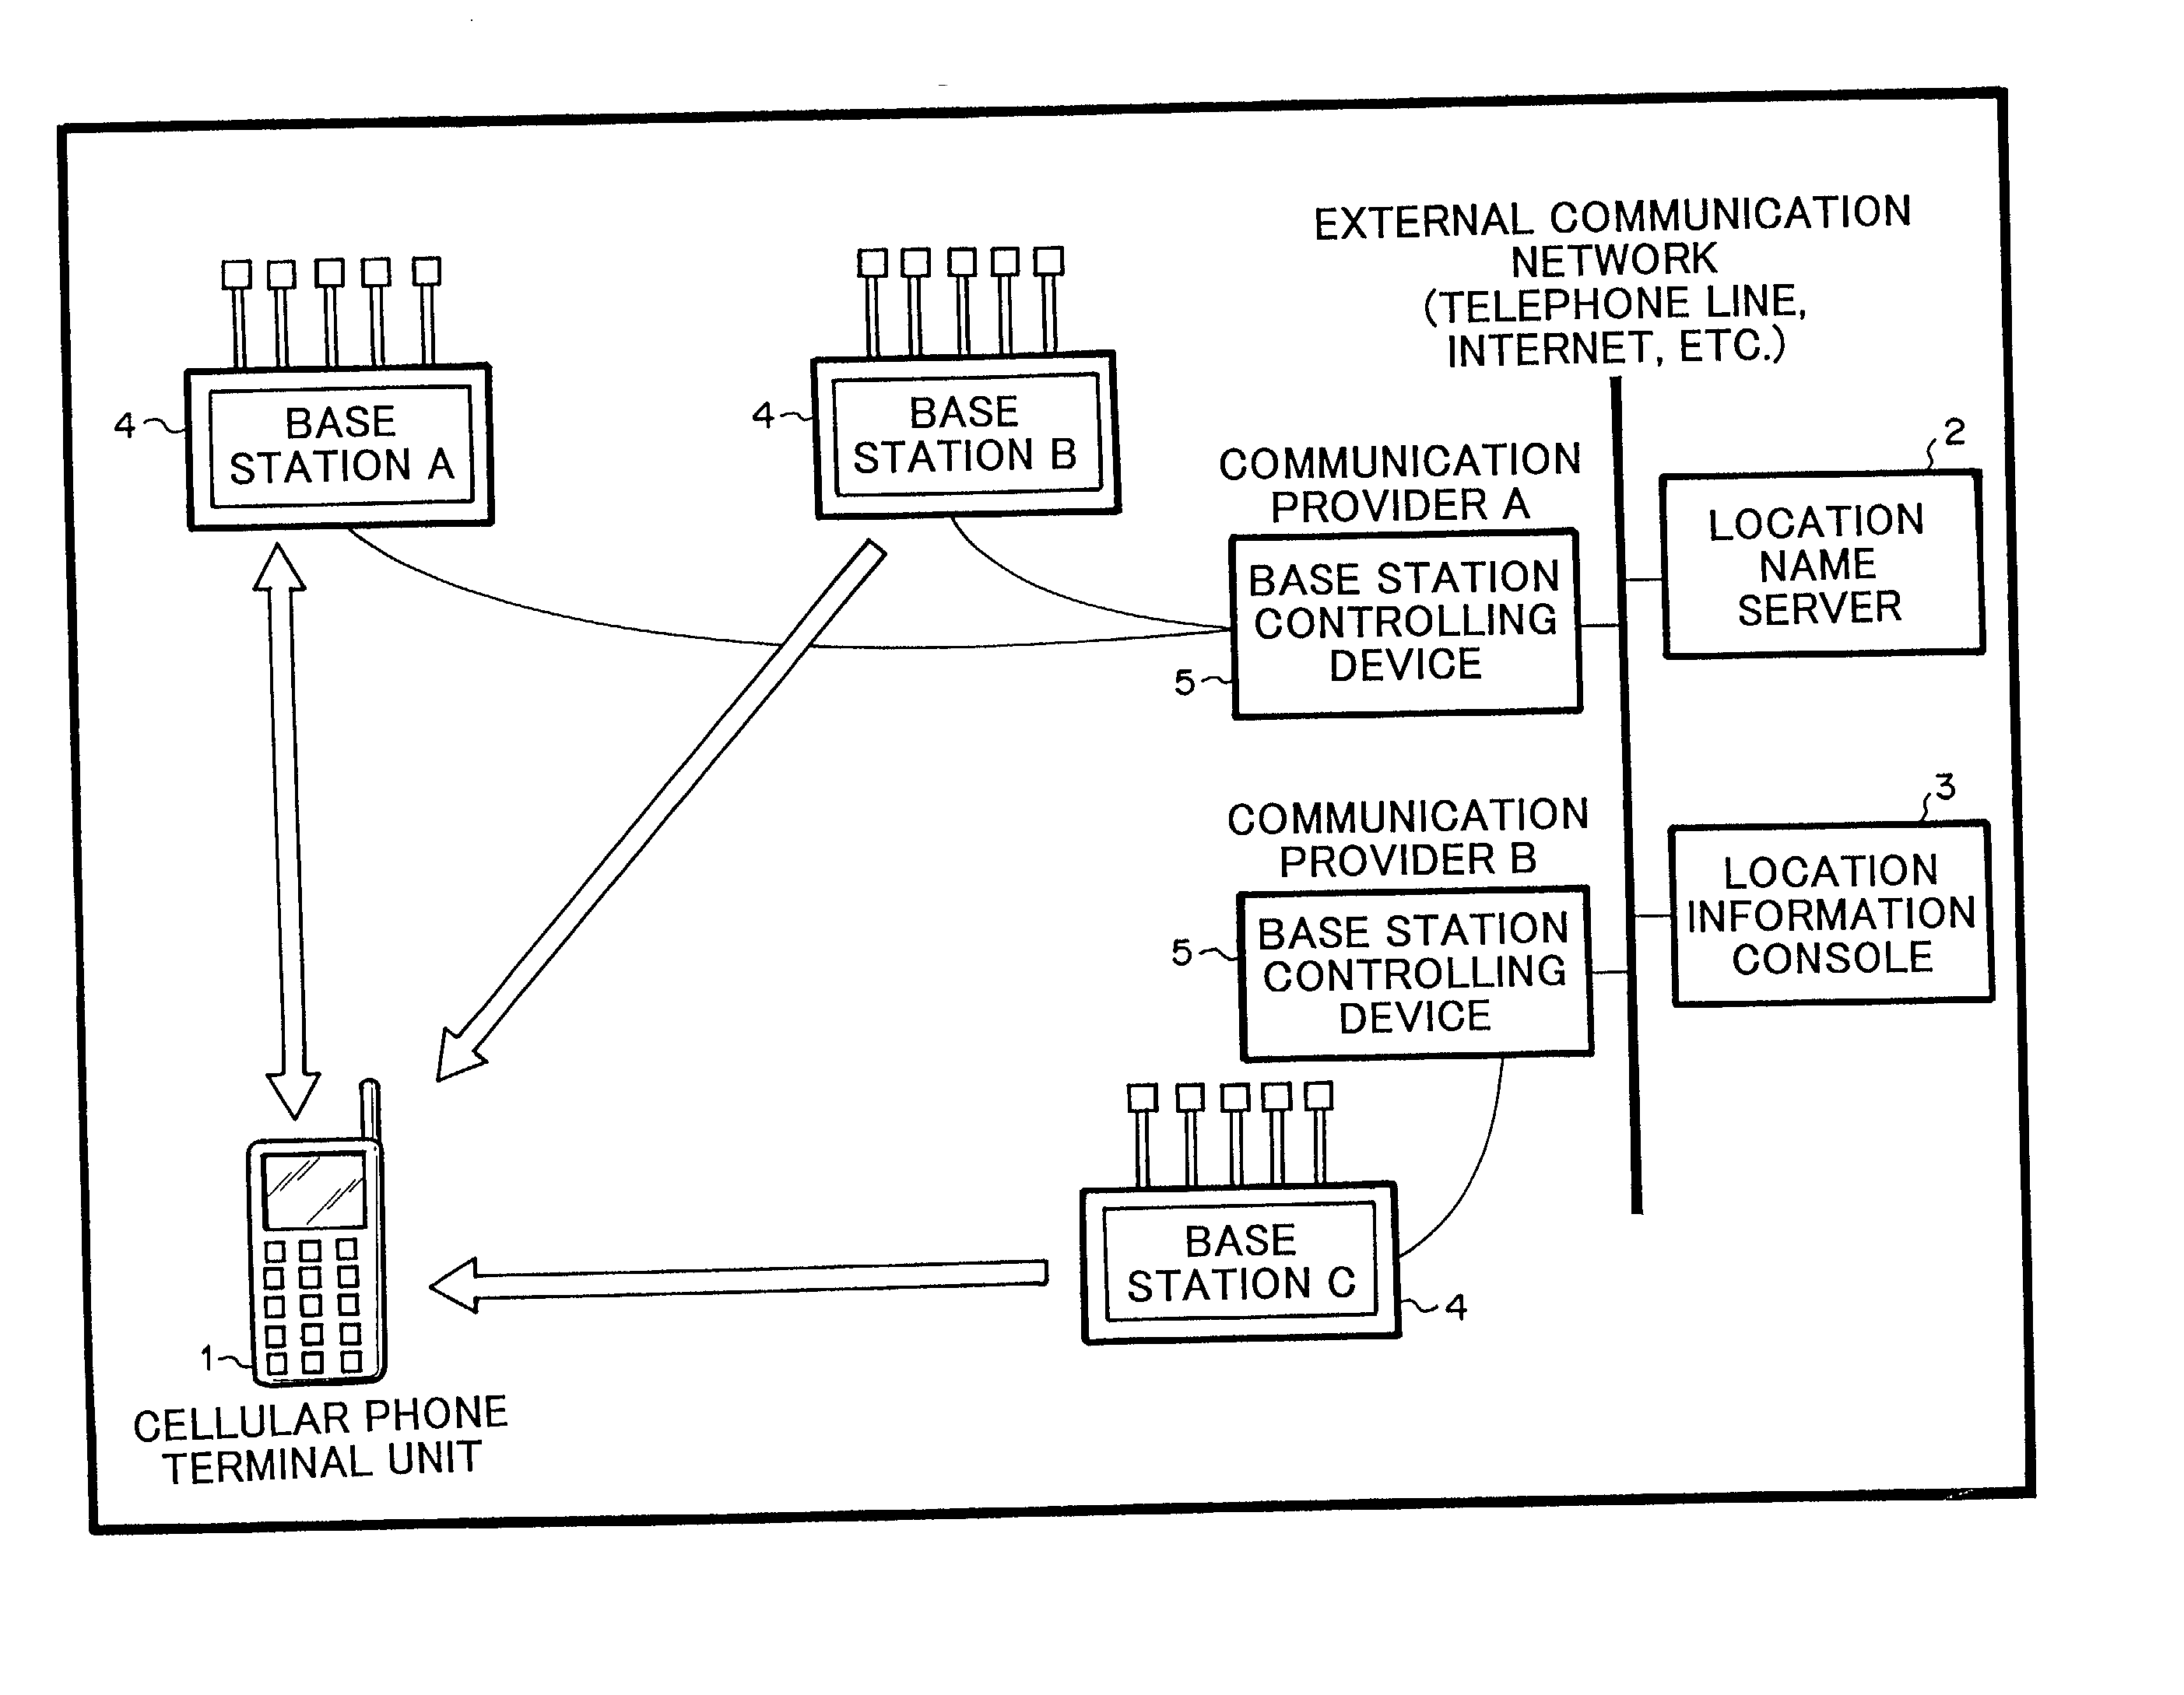 System for providing name of location at which cellular phone terminal unit